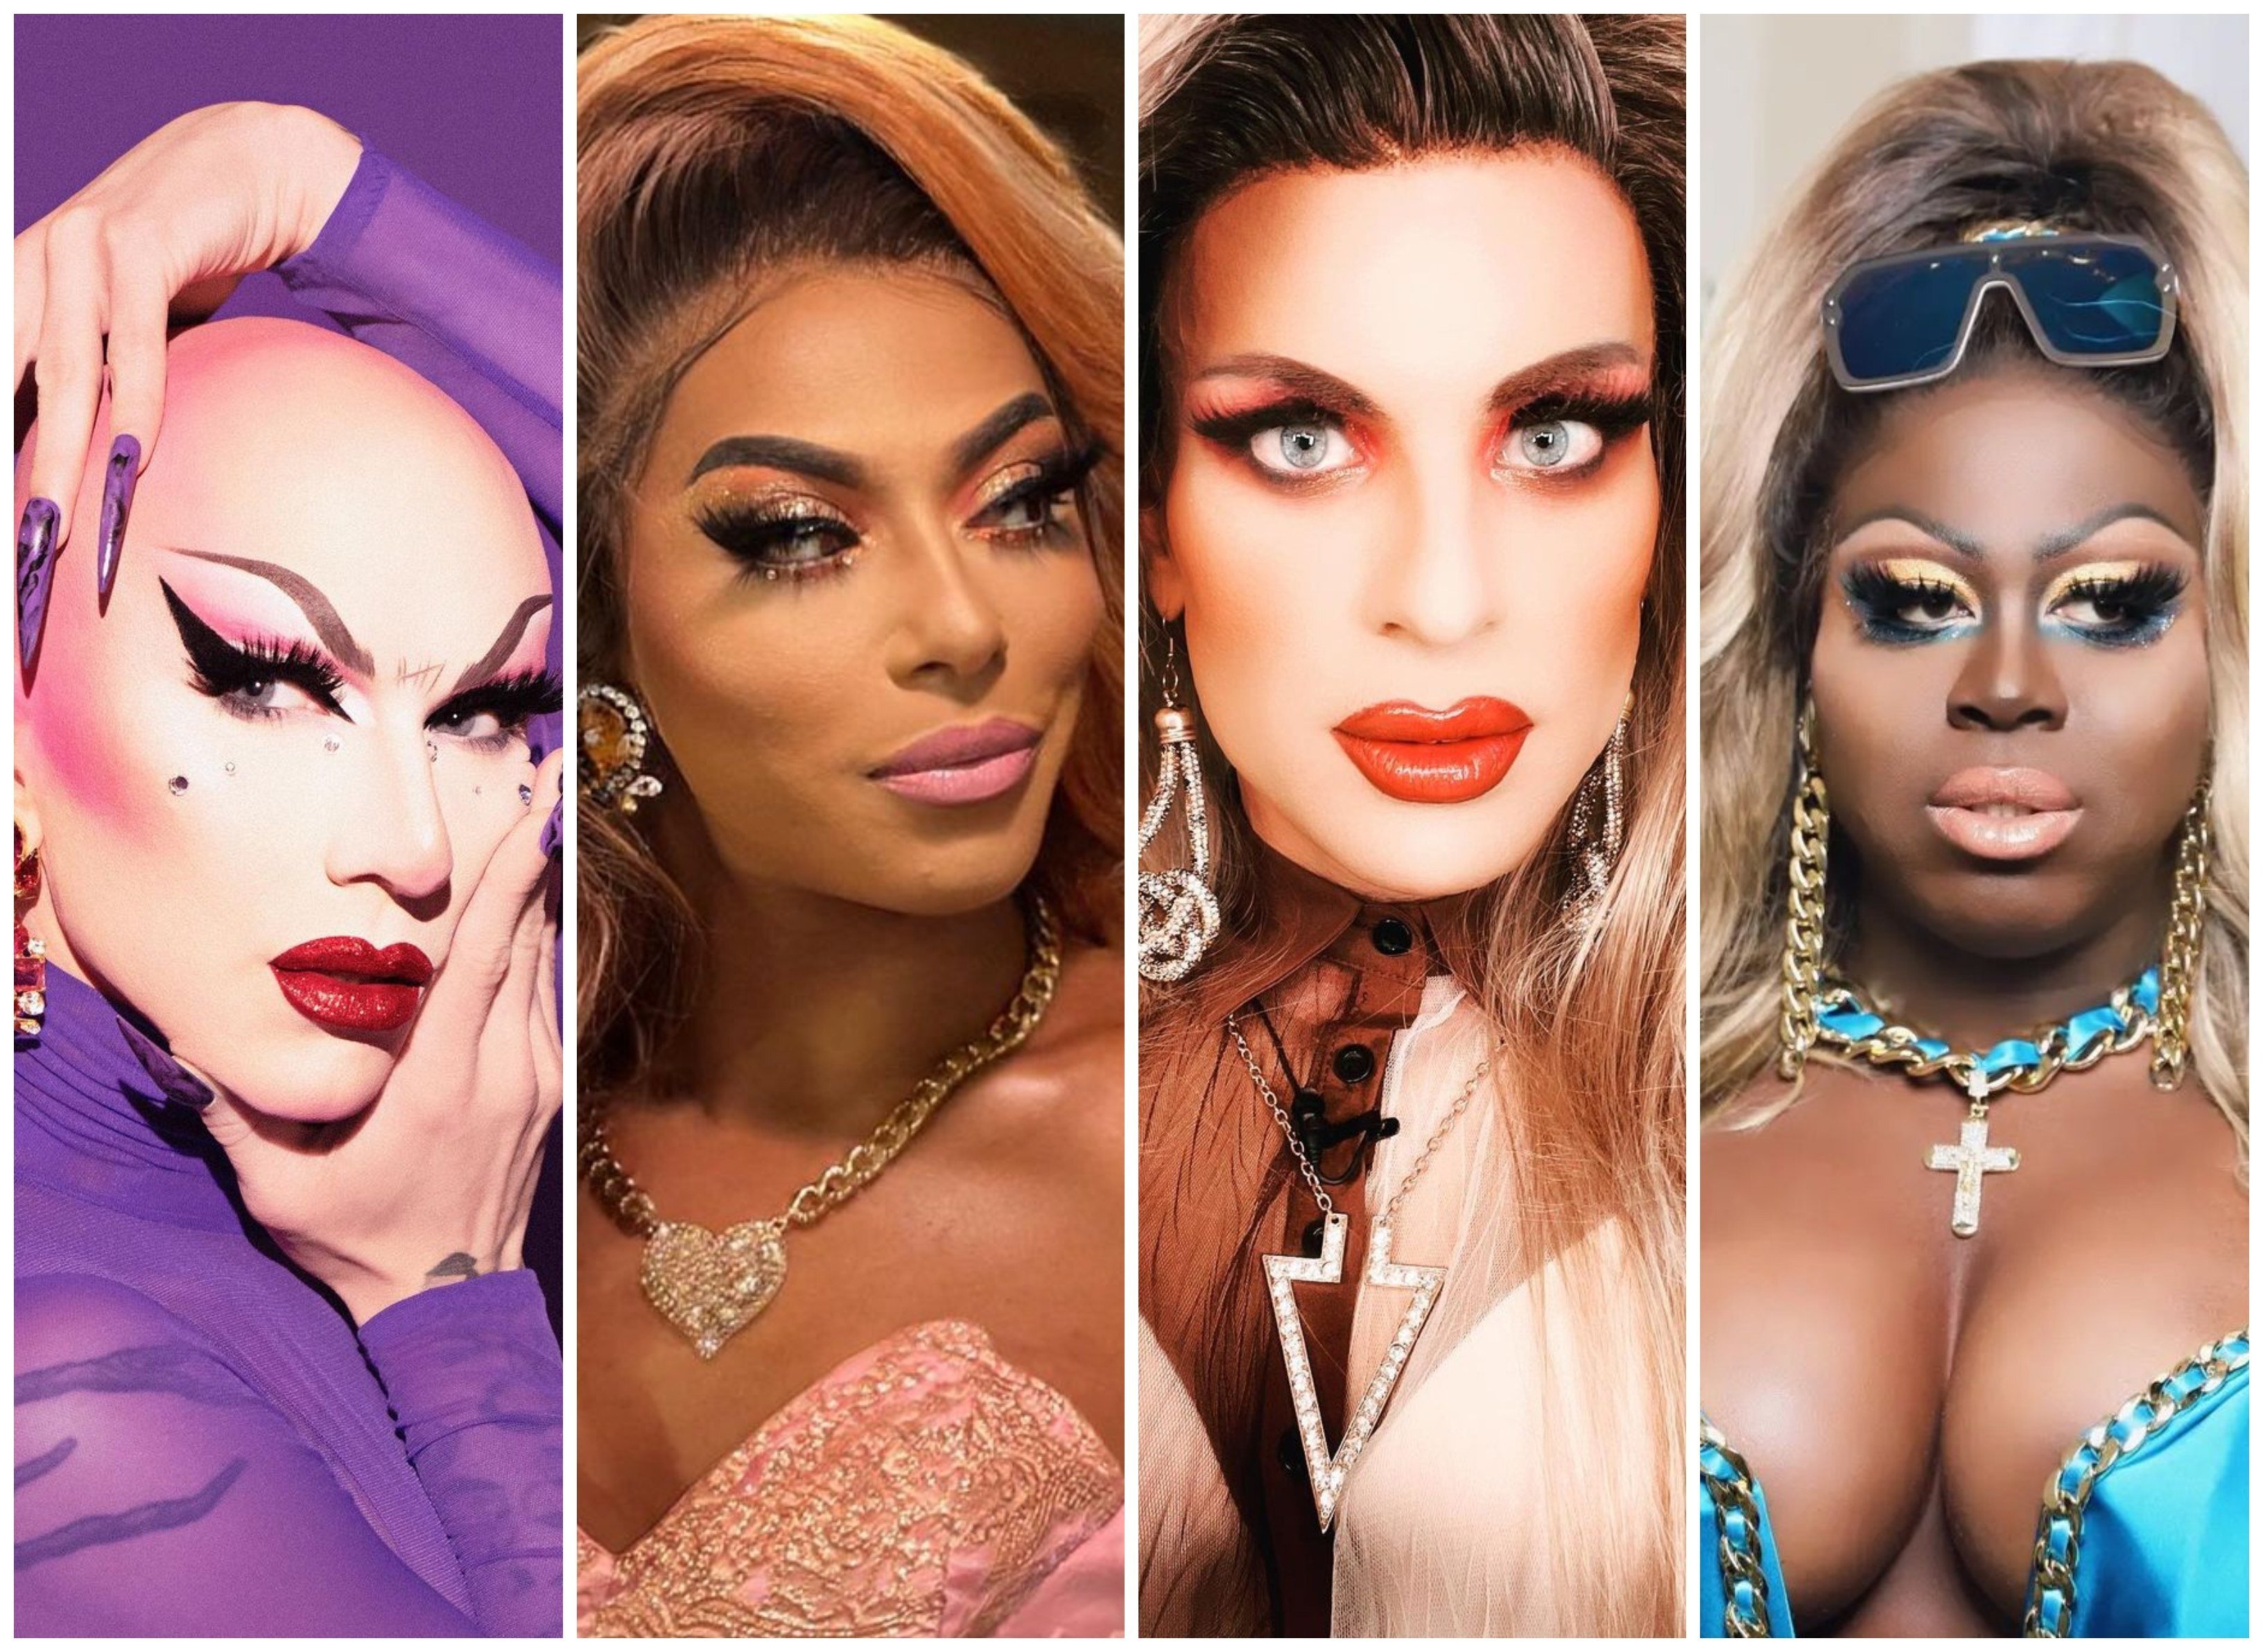 The 10 Most Successful Rupaul'S Drag Race Queens: Katya And Trixie Mattel  Landed A Netflix Show While Bianca Del Rio Has Over Two Million Instagram  Followers | South China Morning Post